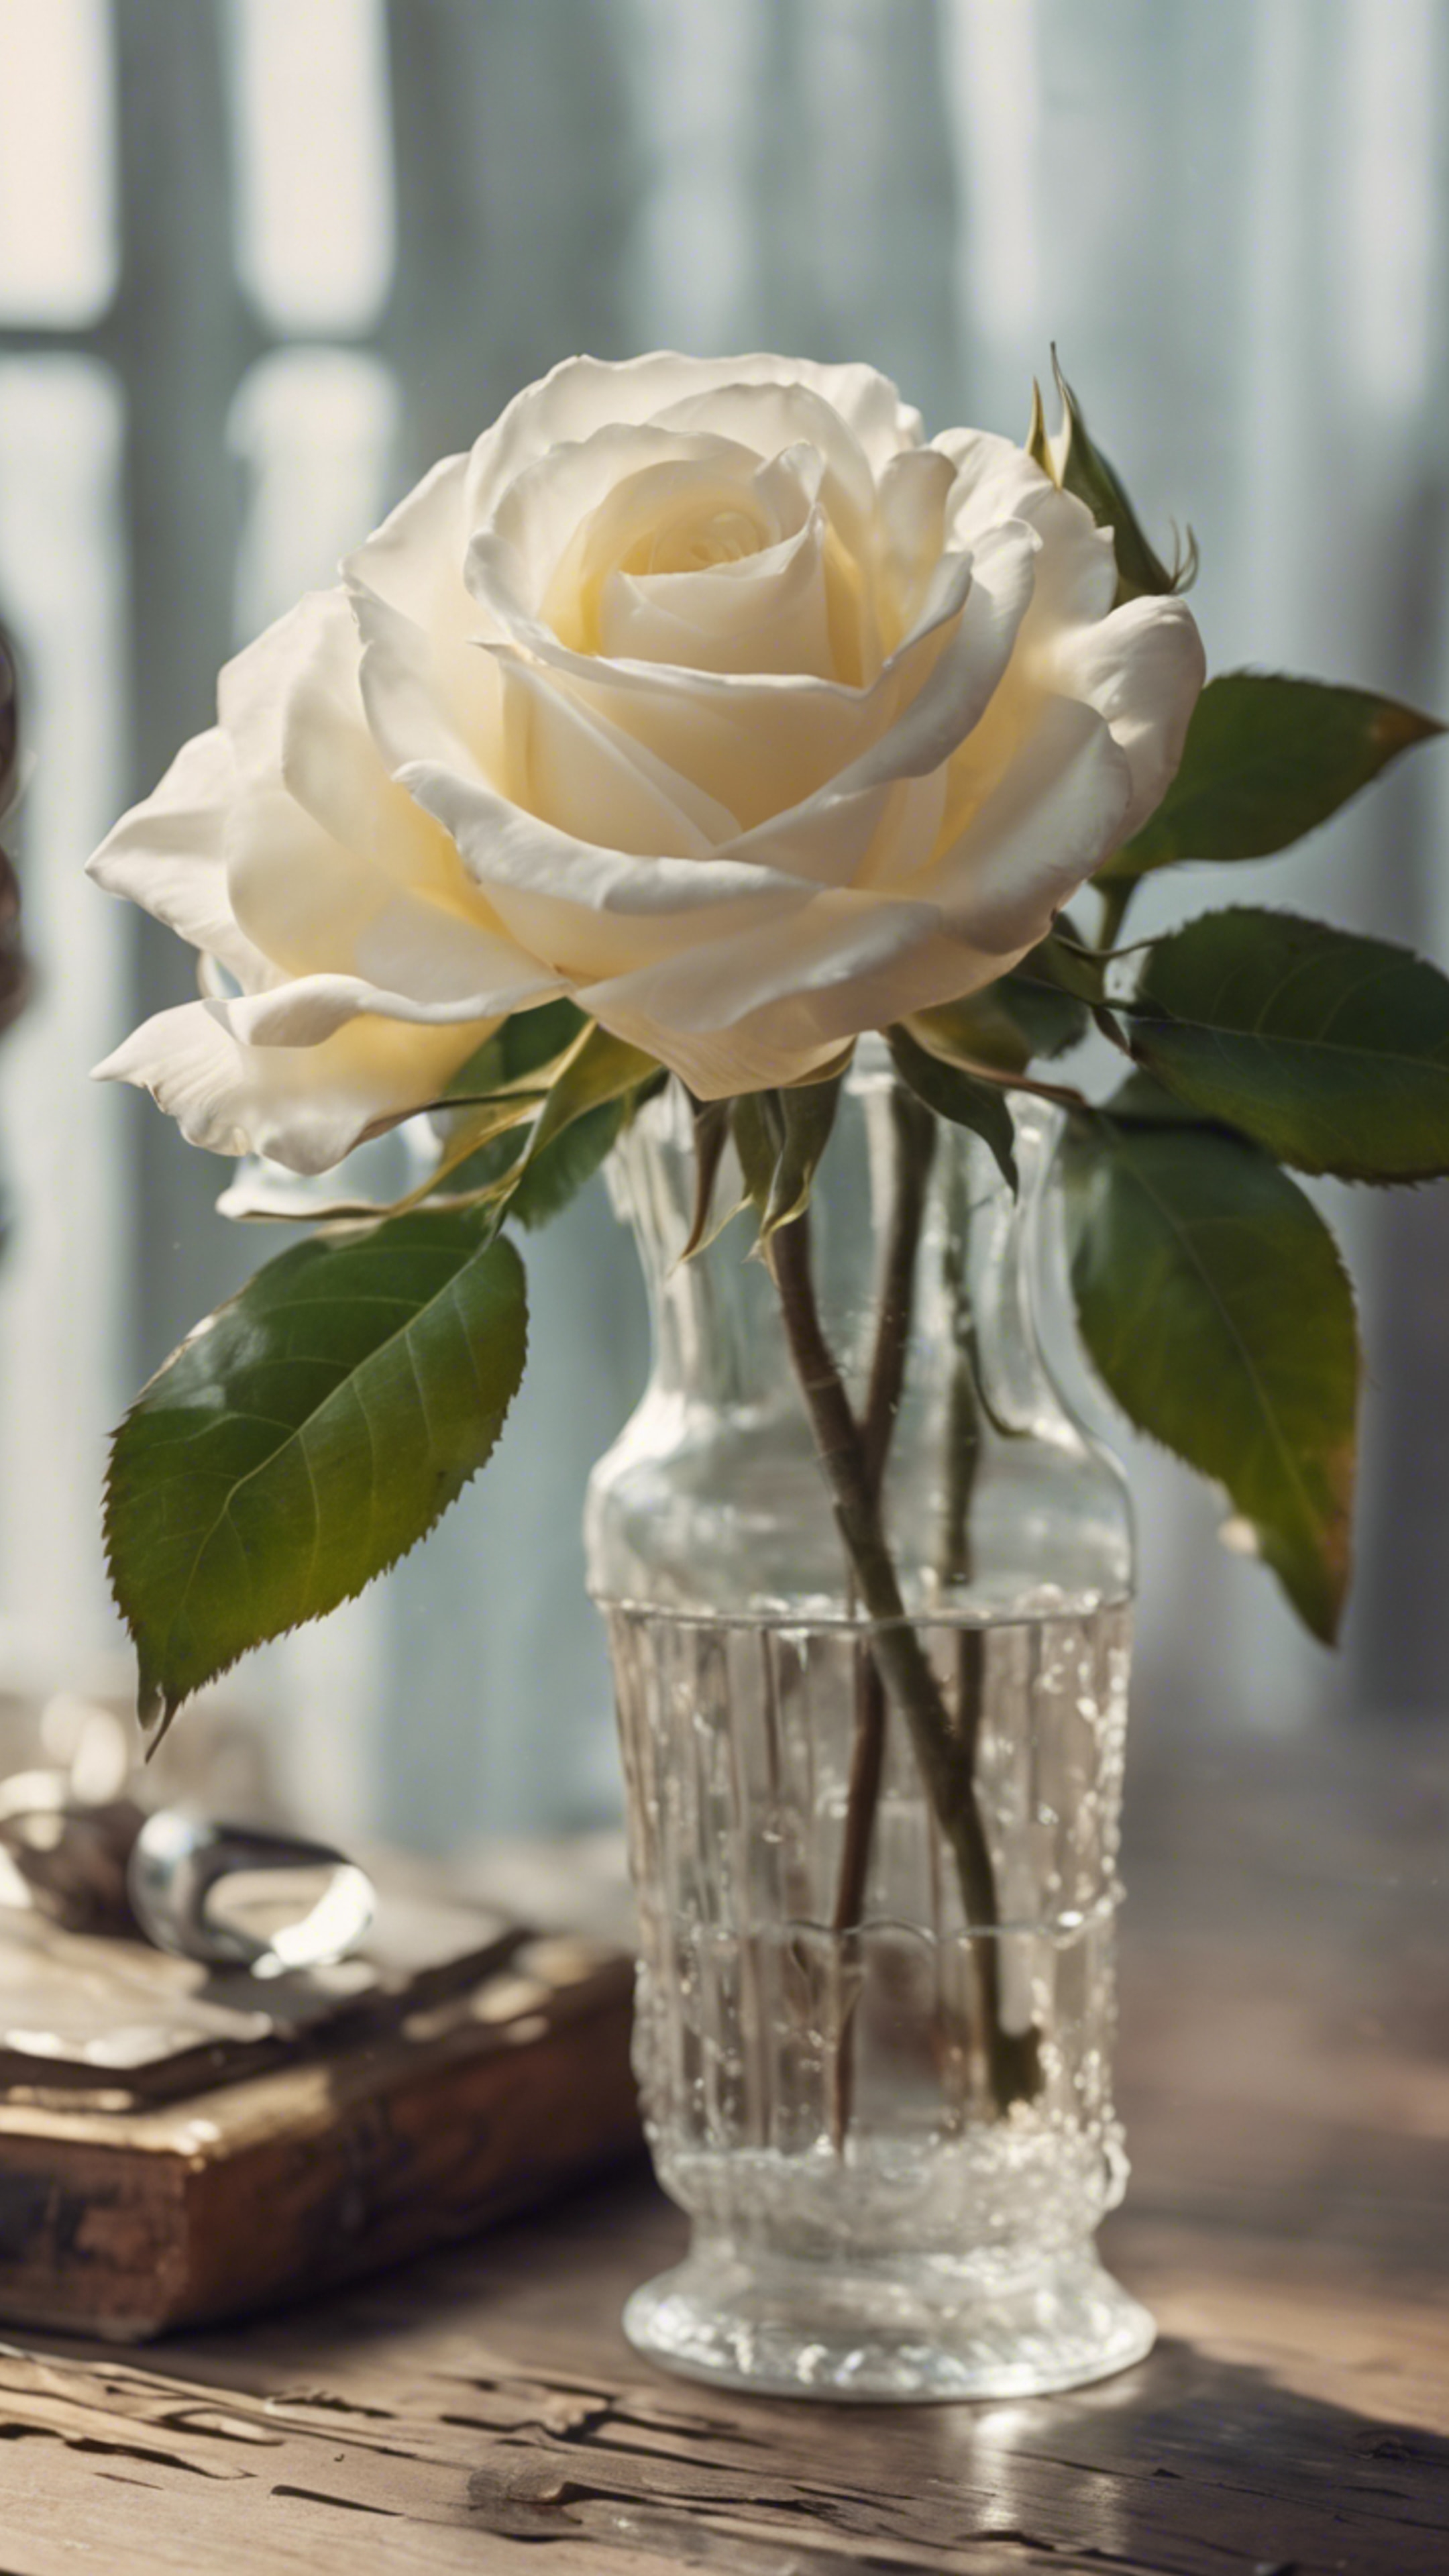 A soft white rose in a vintage glass vase on an antique wooden table. Hintergrund[fc4486b9e2ee4669bbfe]